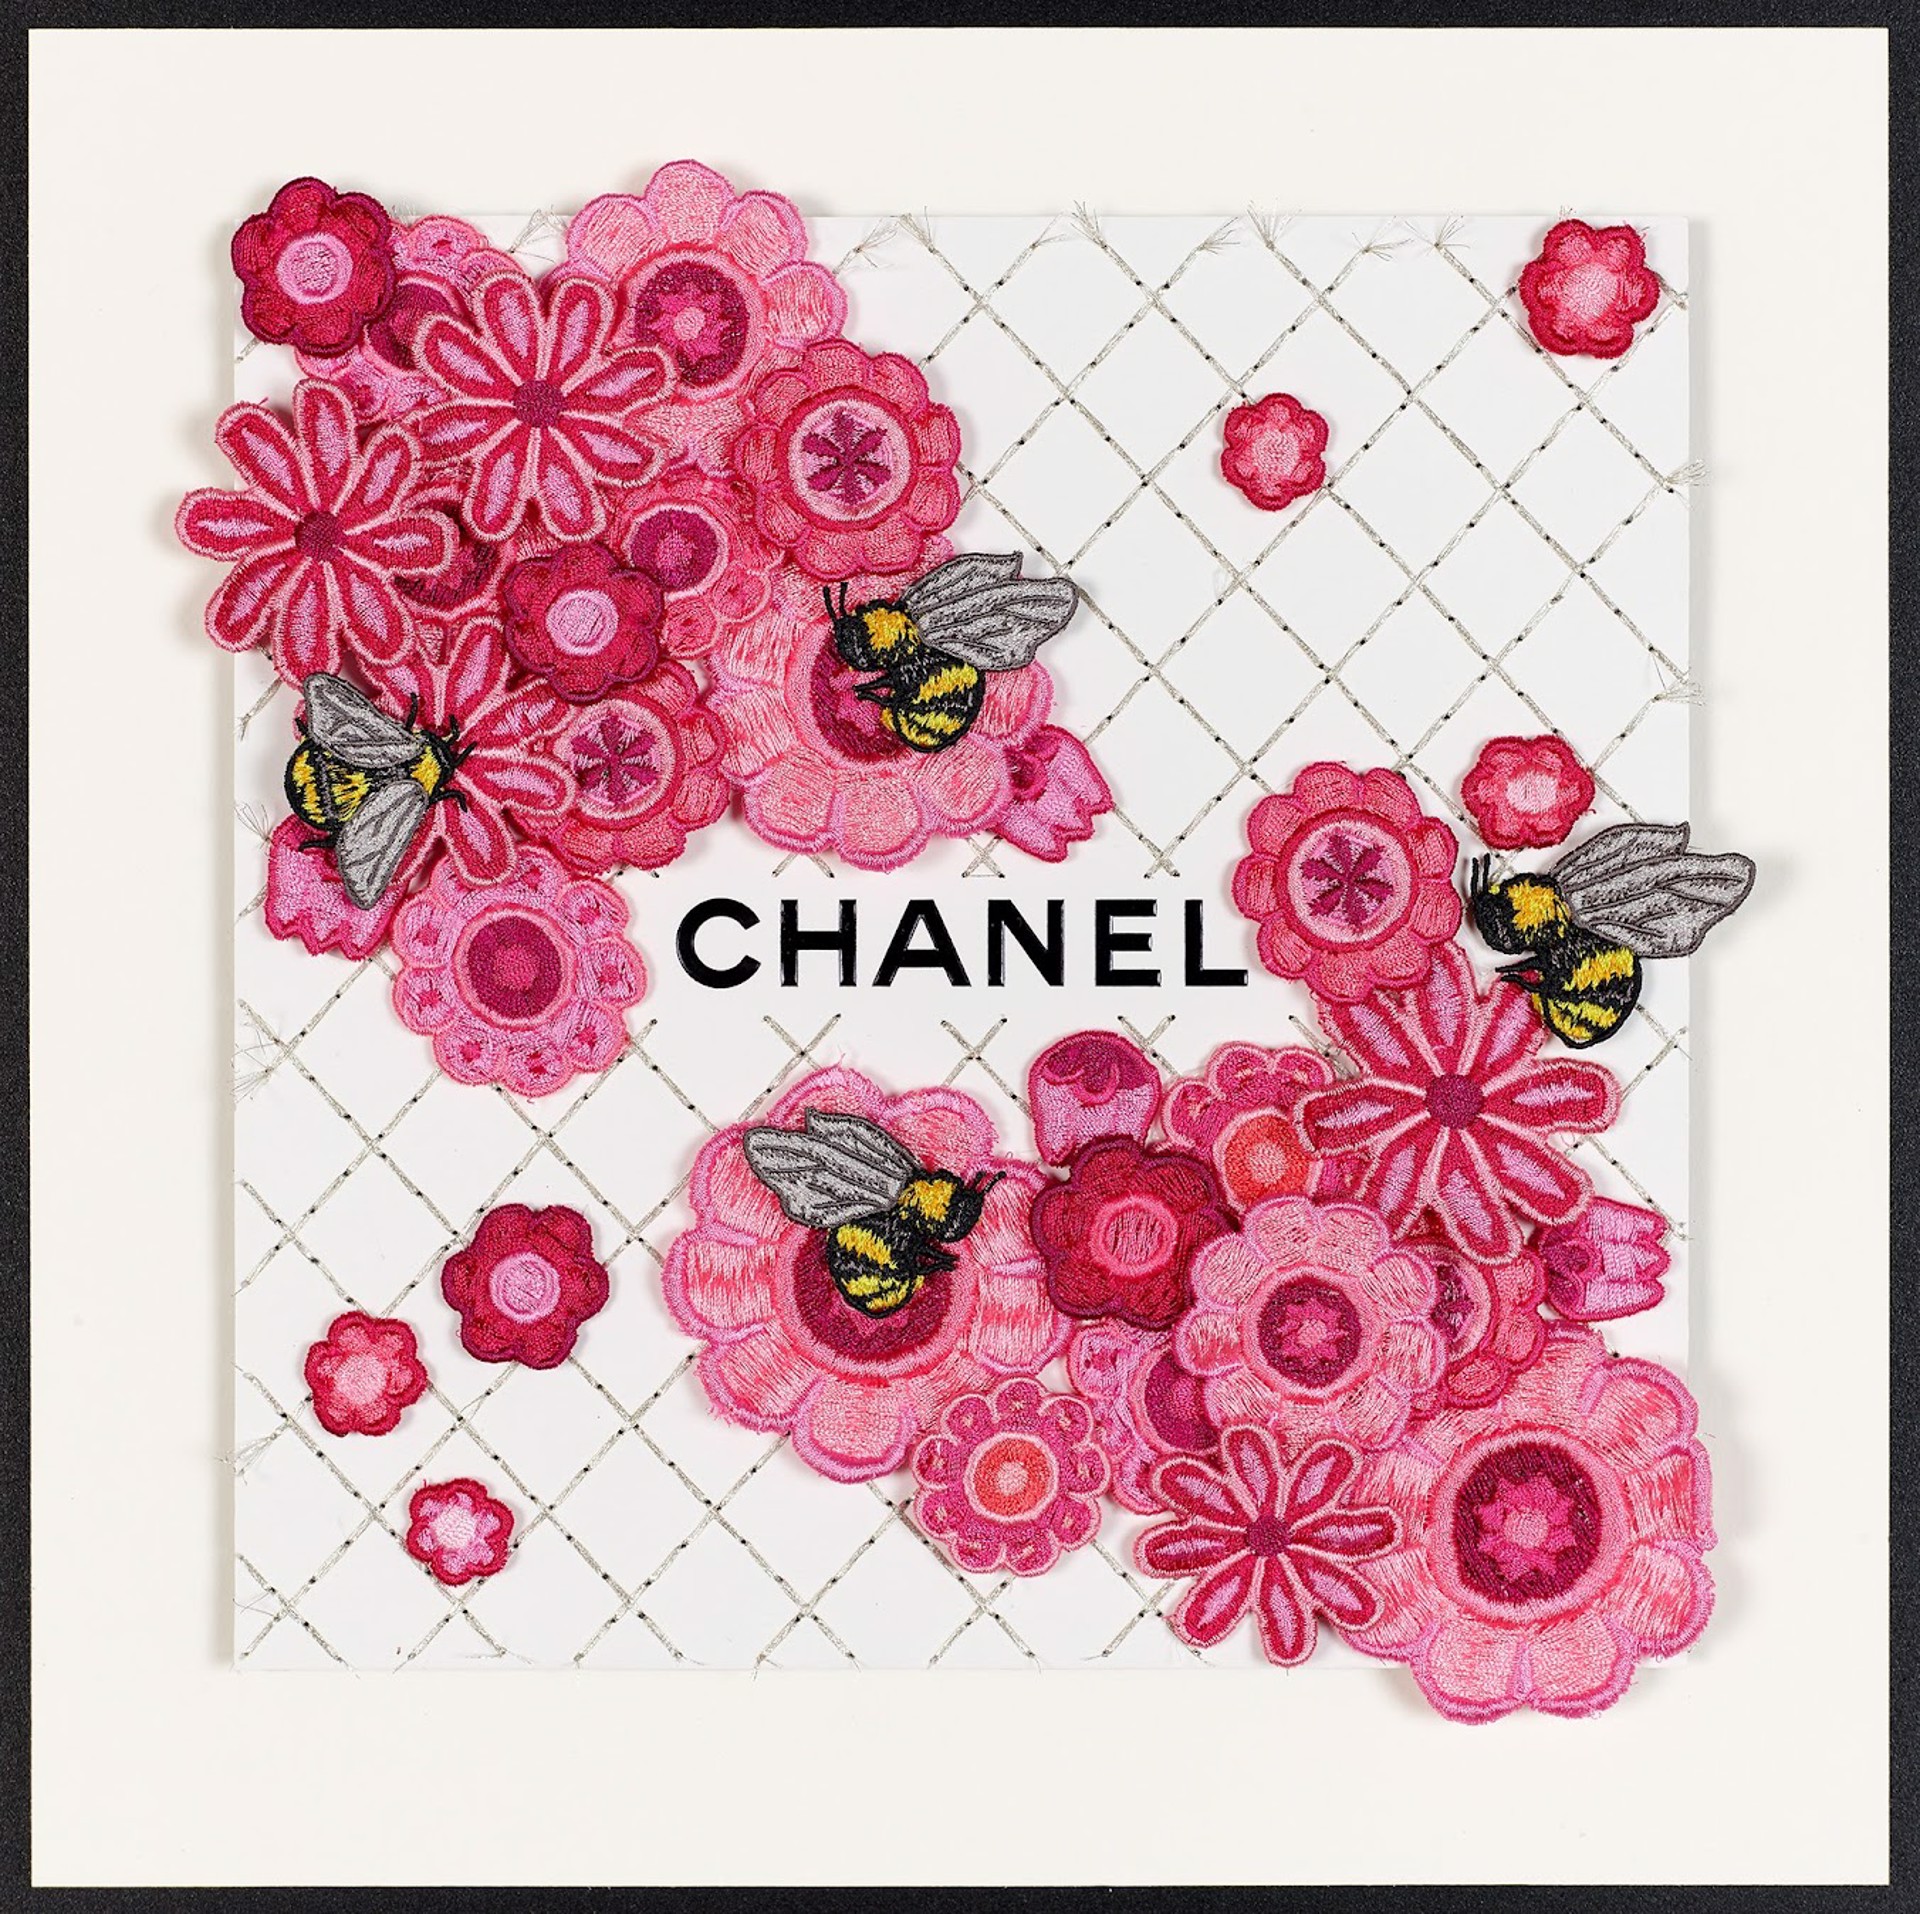 Chanel Sweets XVII by Stephen Wilson